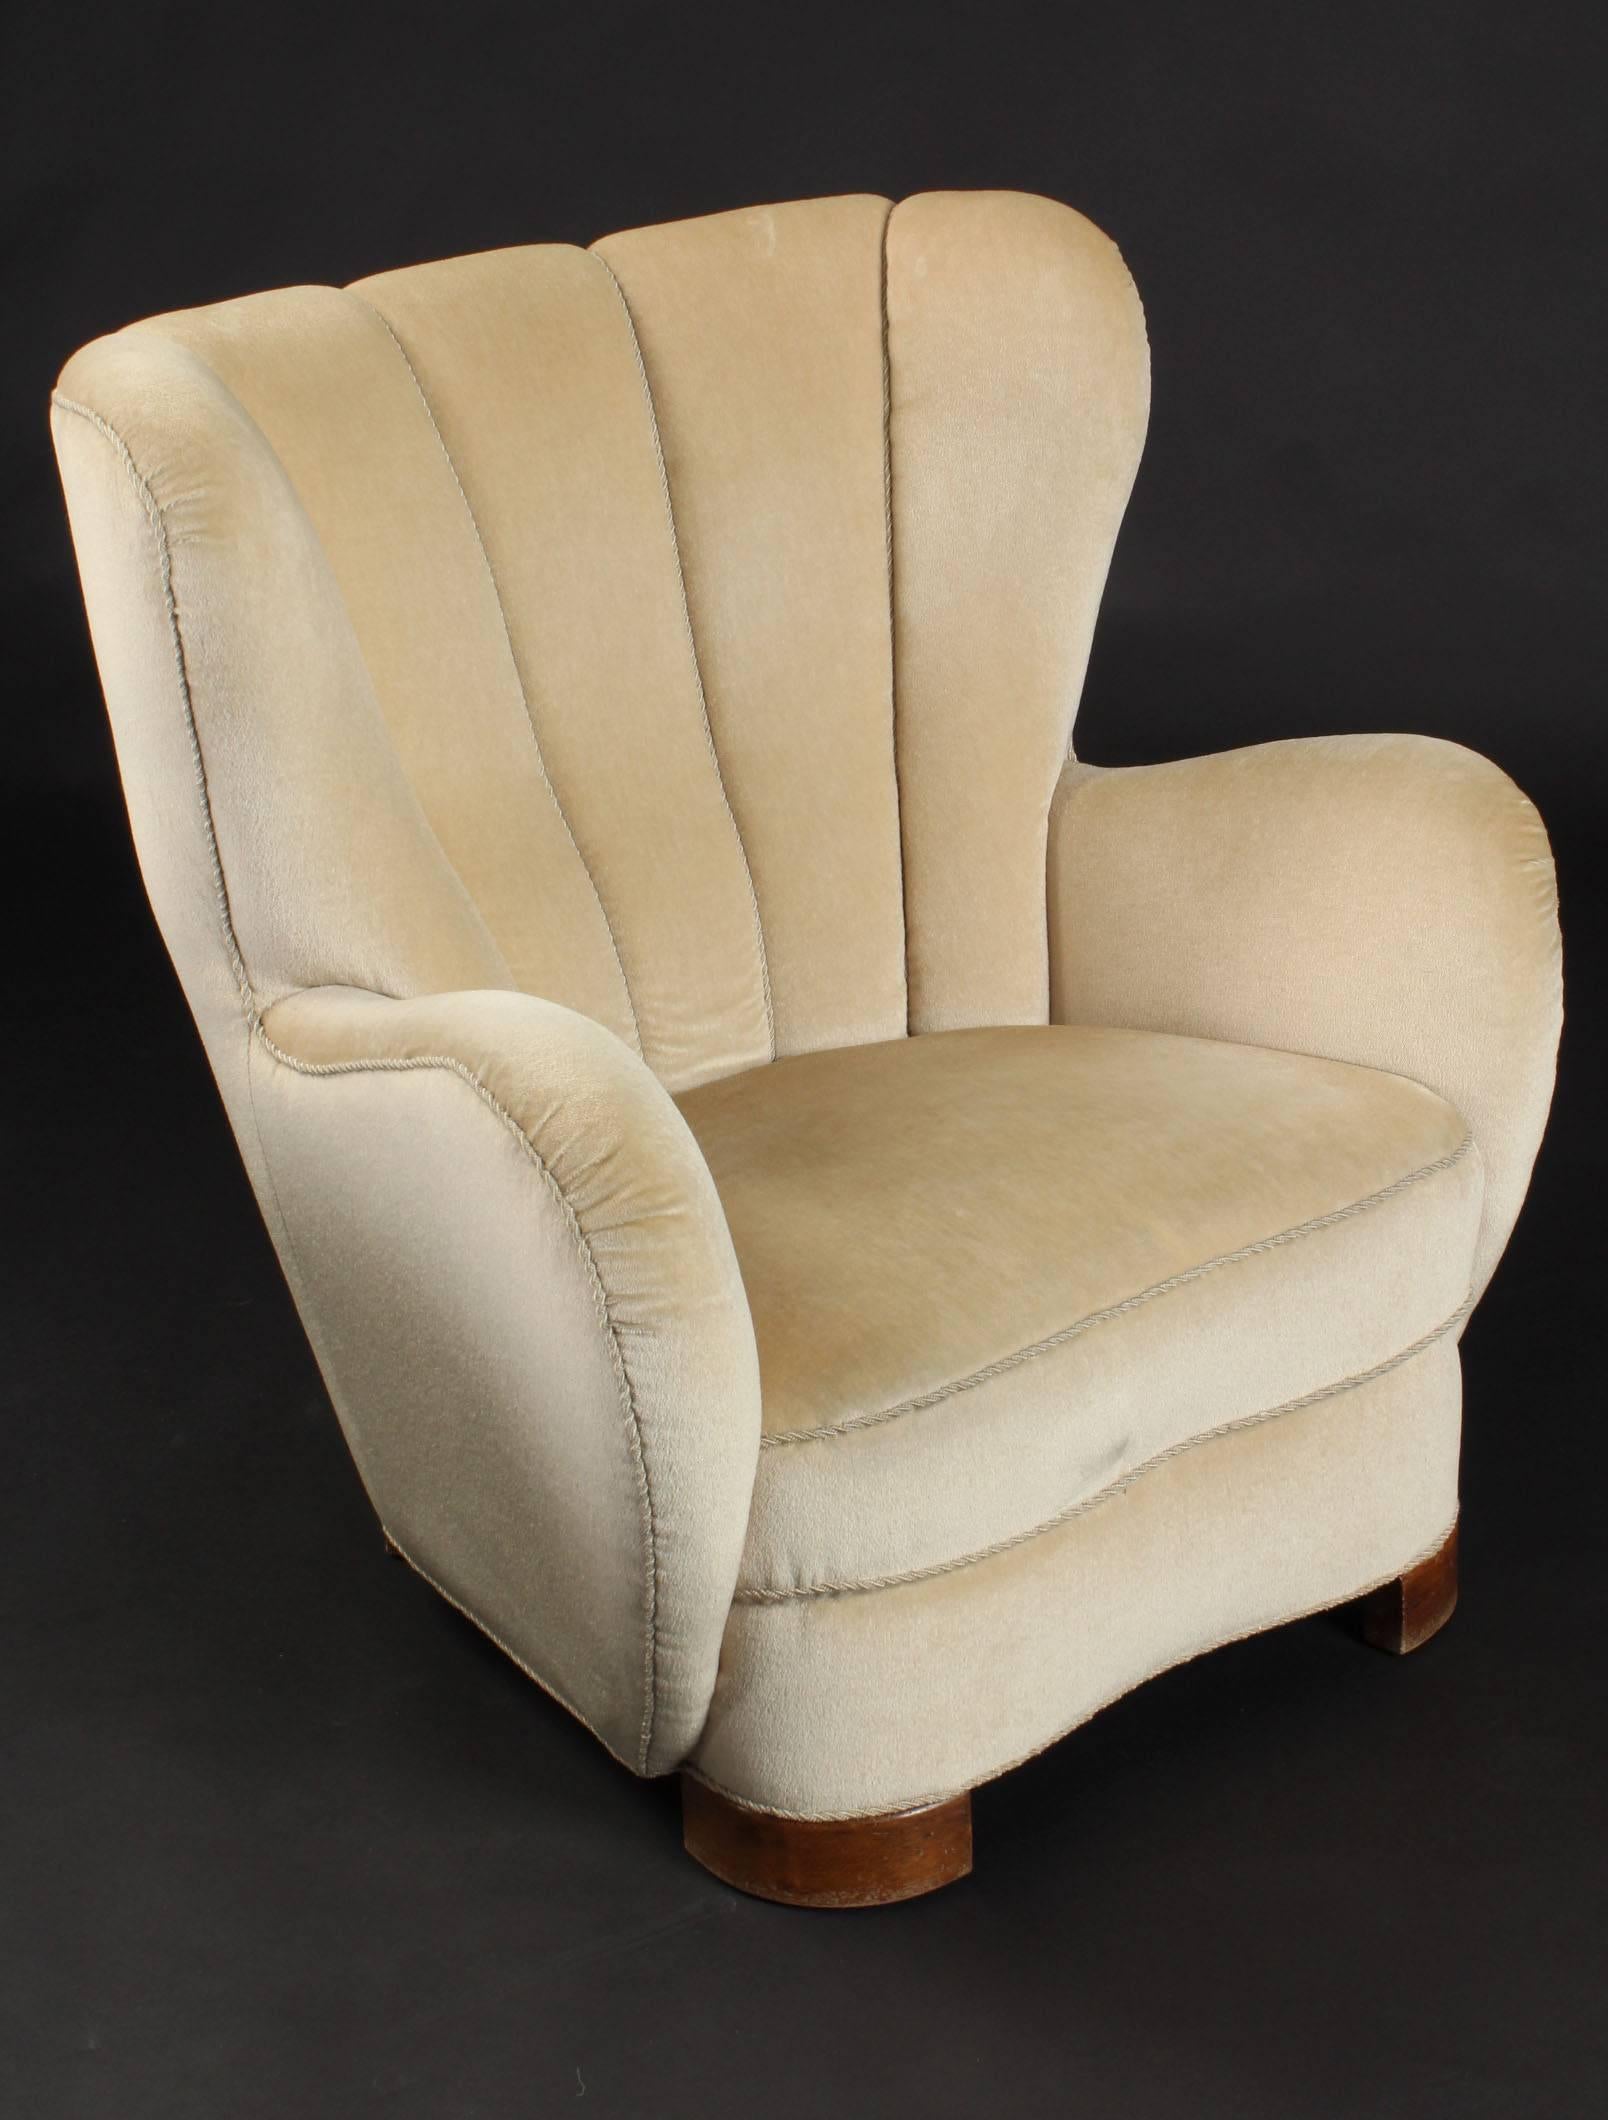 Comfortable curved wingback armchair produced in Denmark in the 1940s. It is in its original condition with ivory mohair fabric. The block legs are made of beech wood. See also the matching sofa in the same form and fabric.